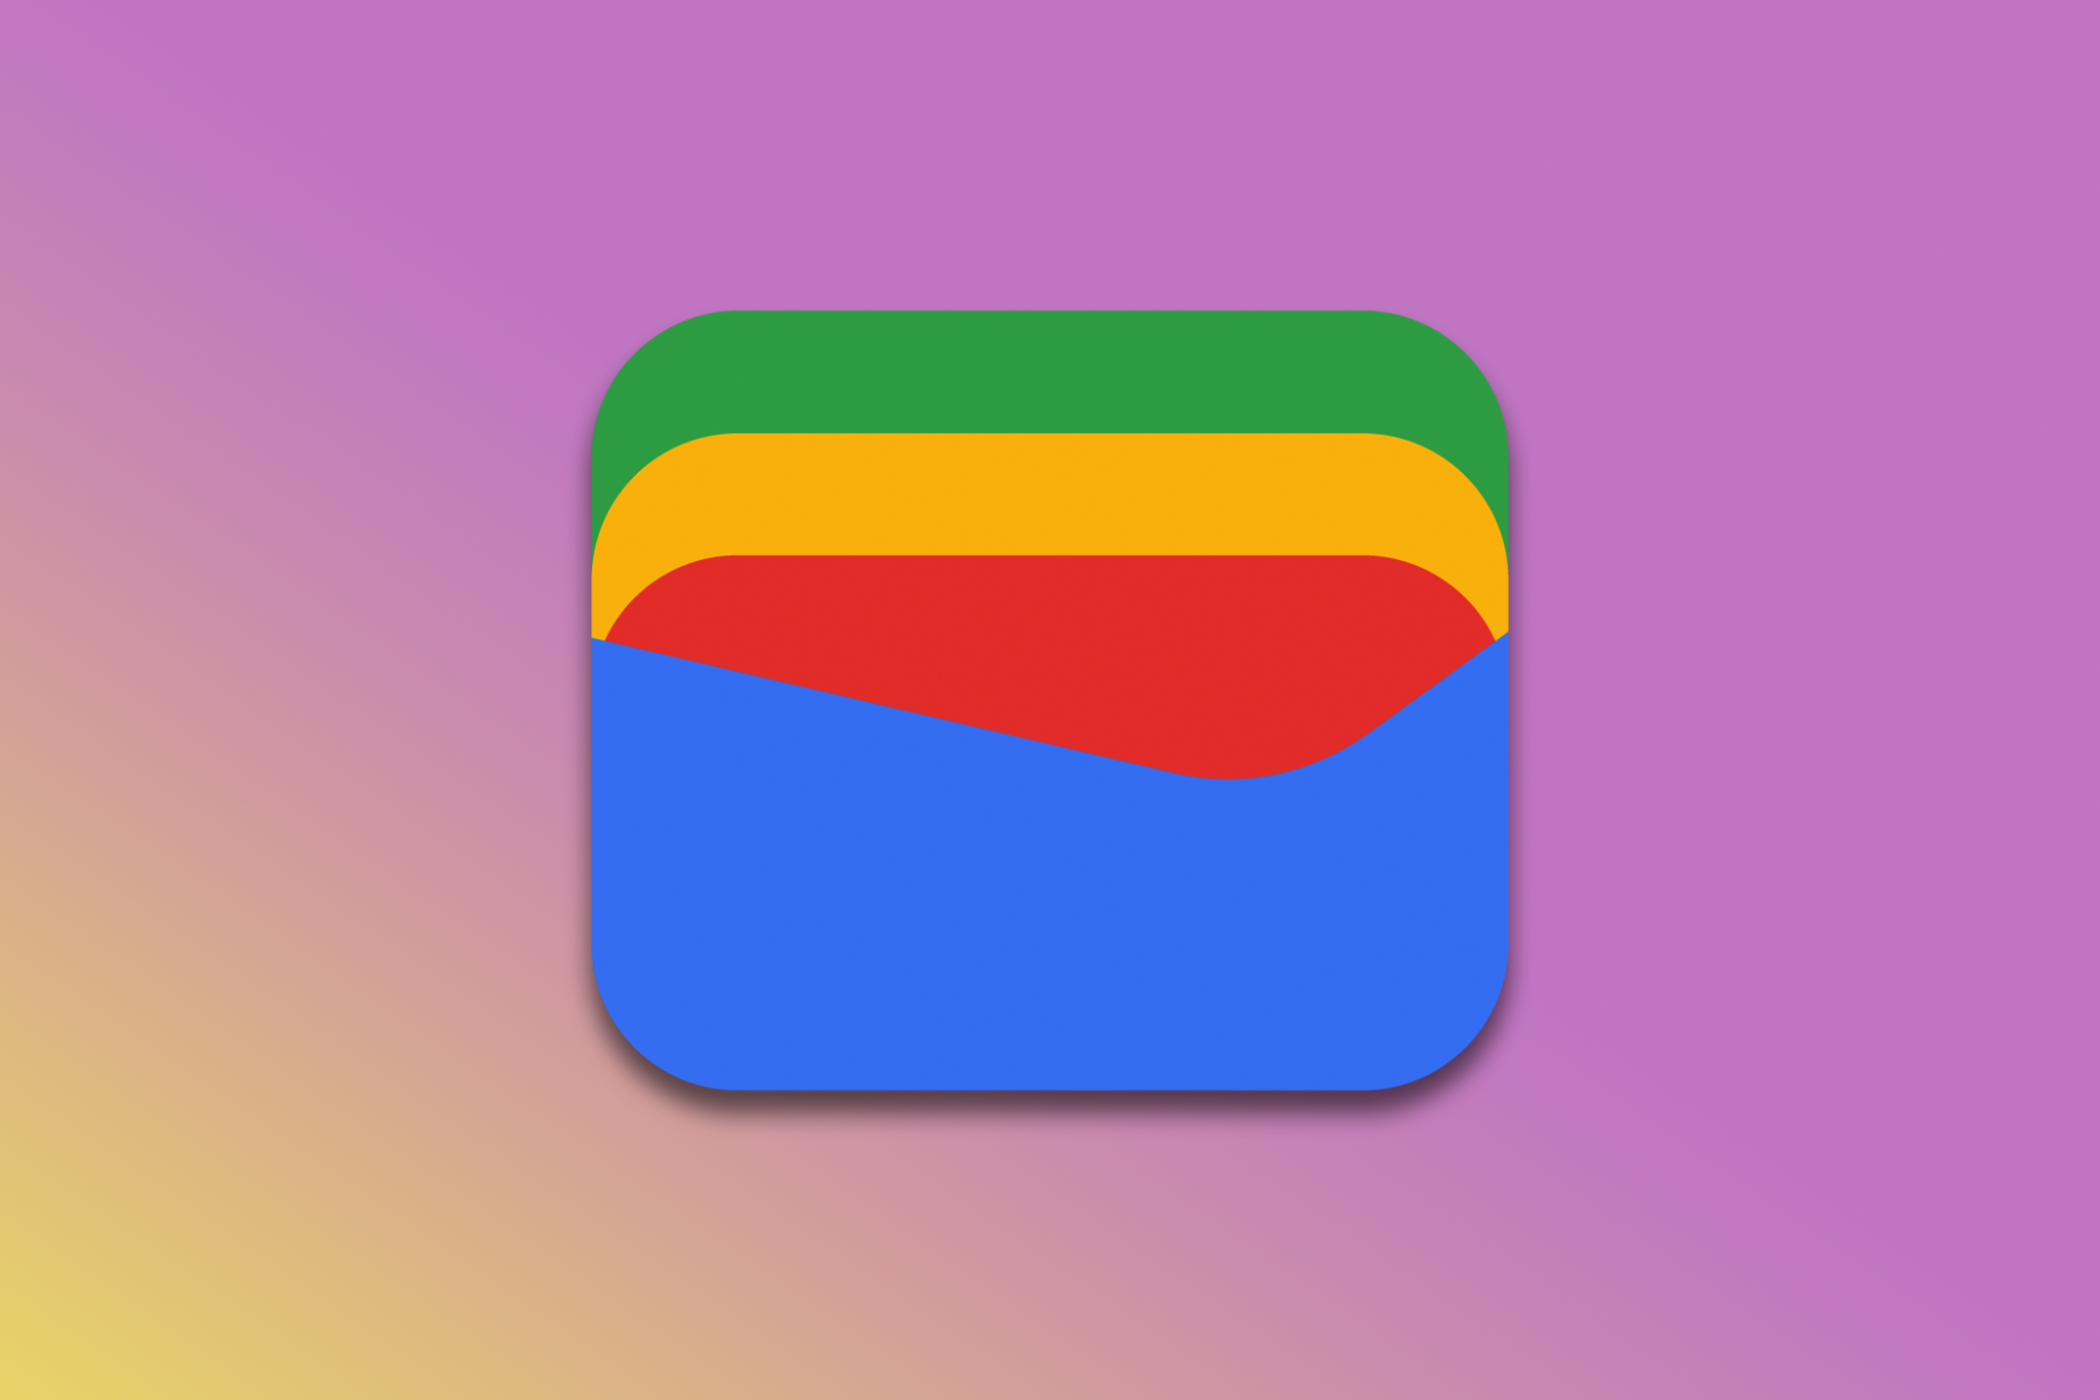 The Google Wallet logo on a gradient background.